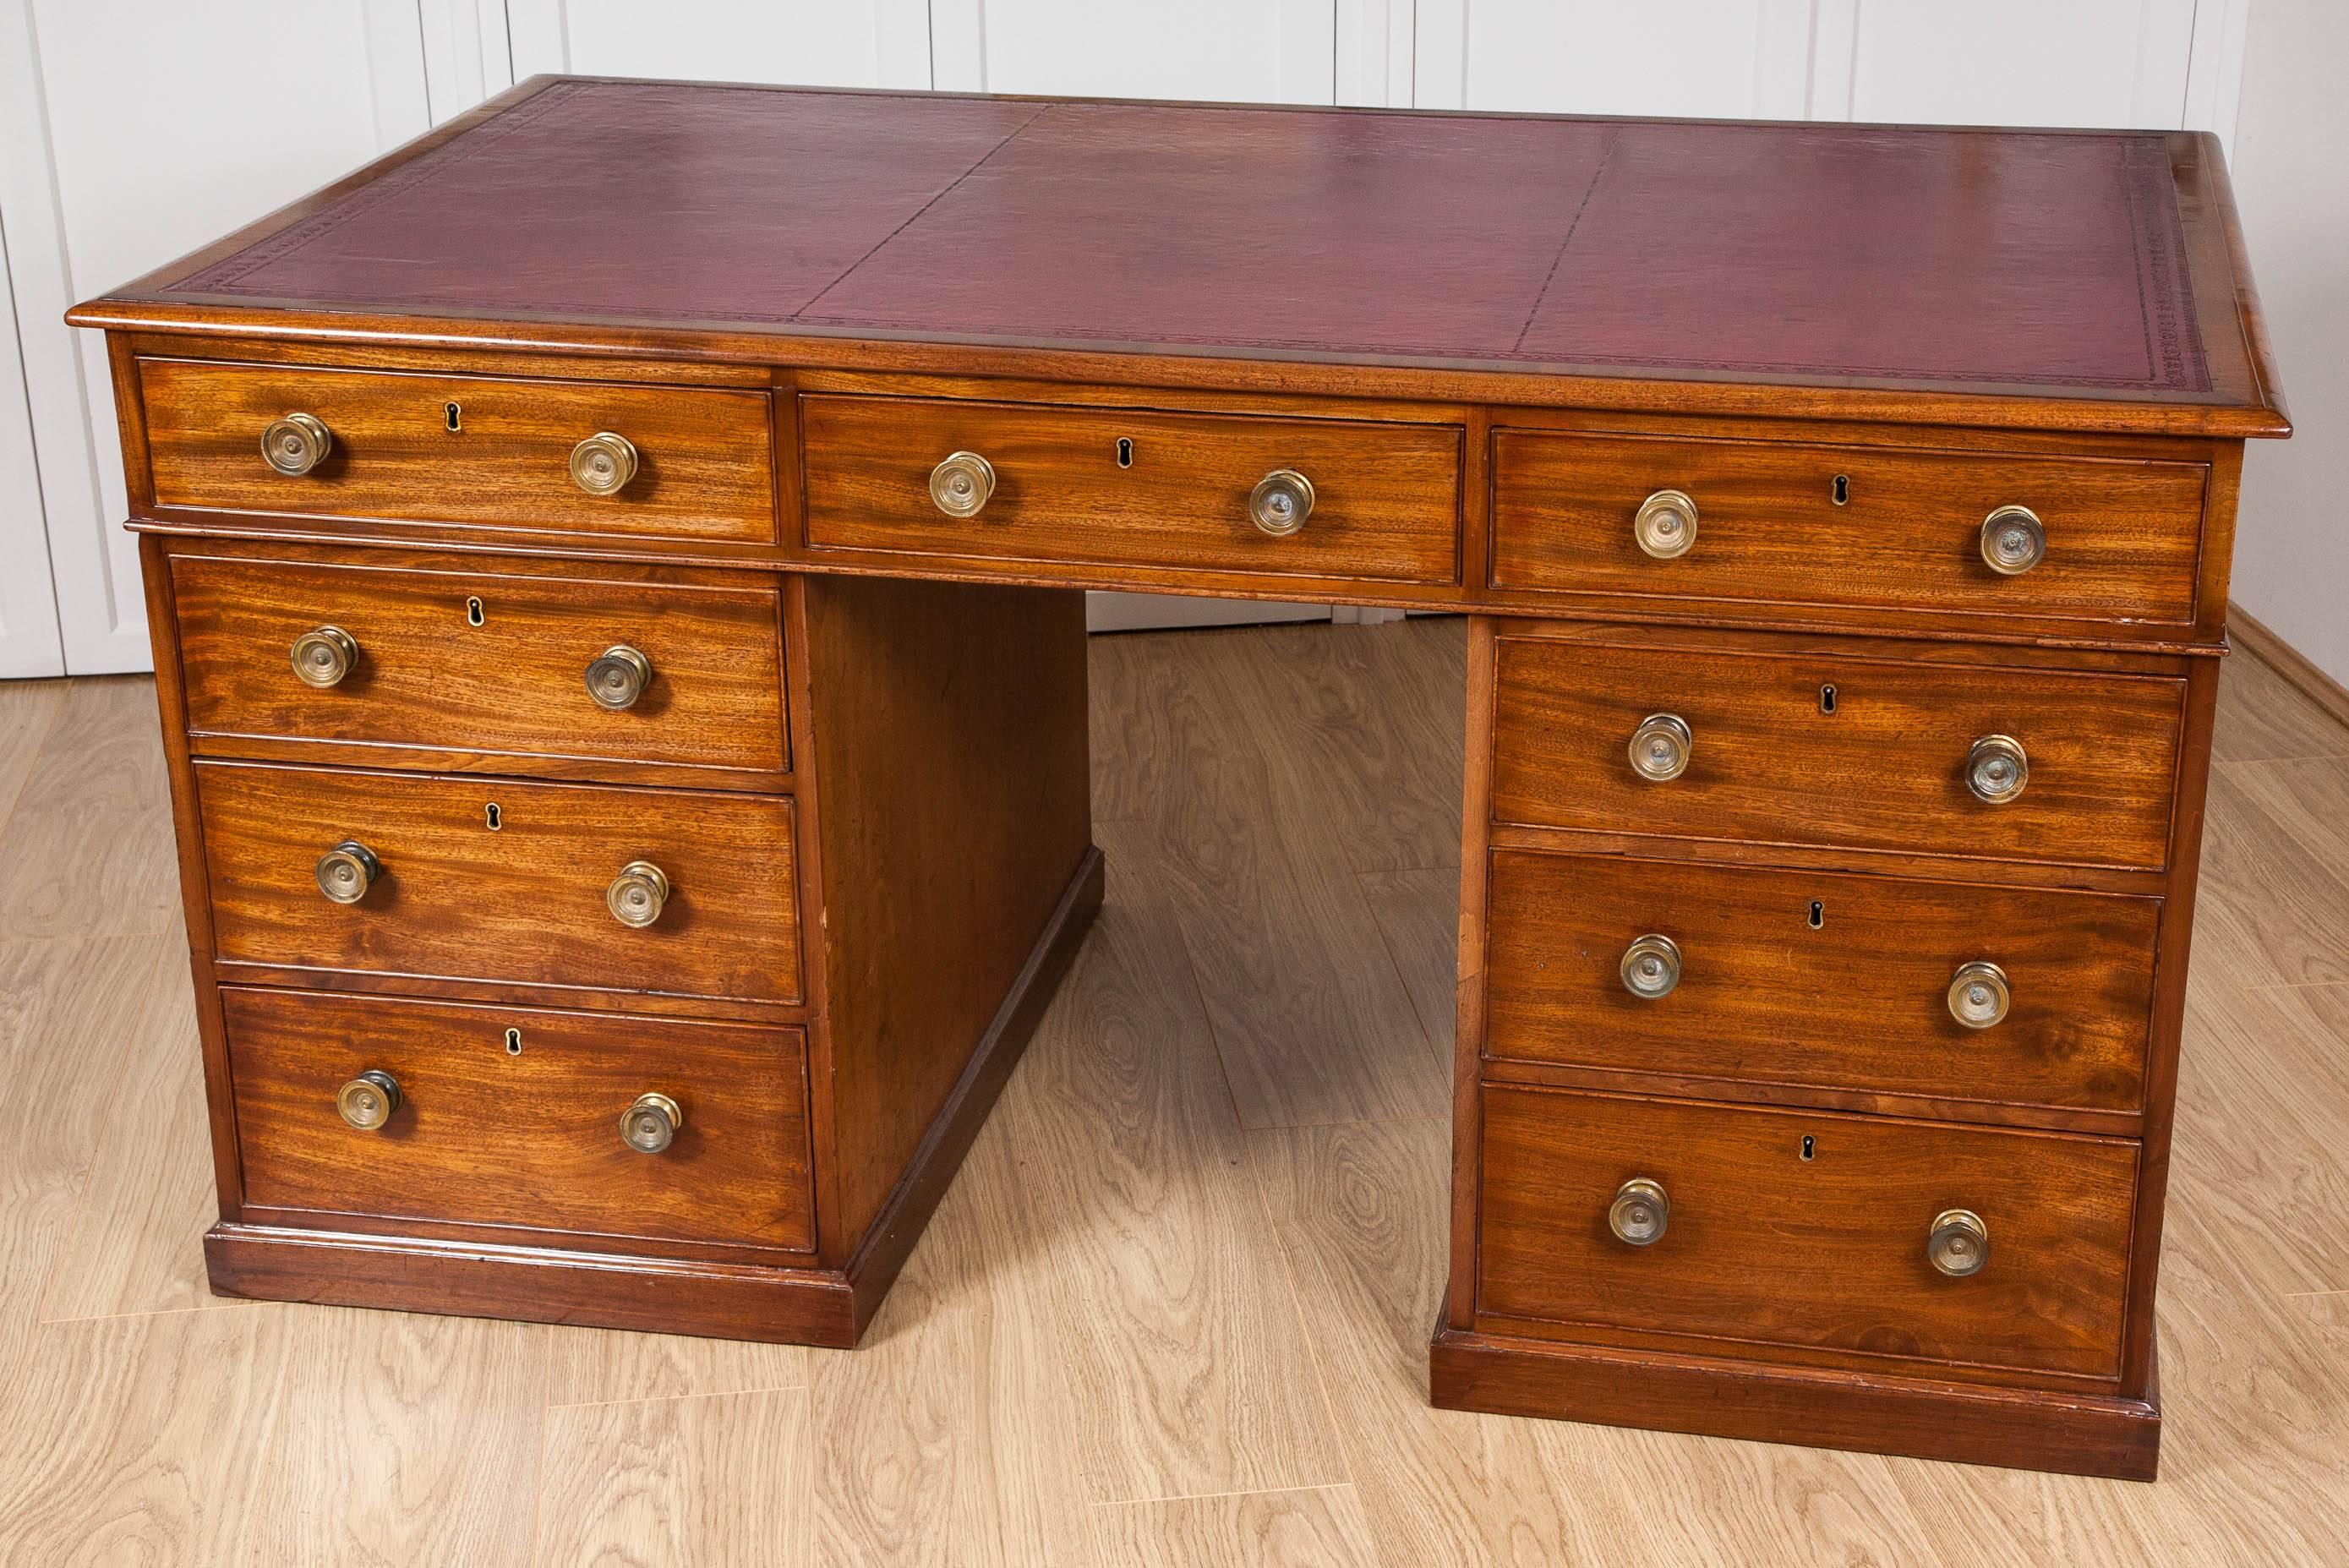 19th Century Regency Period Early 19th century Mahogany Partners Desk with drawers both sides For Sale